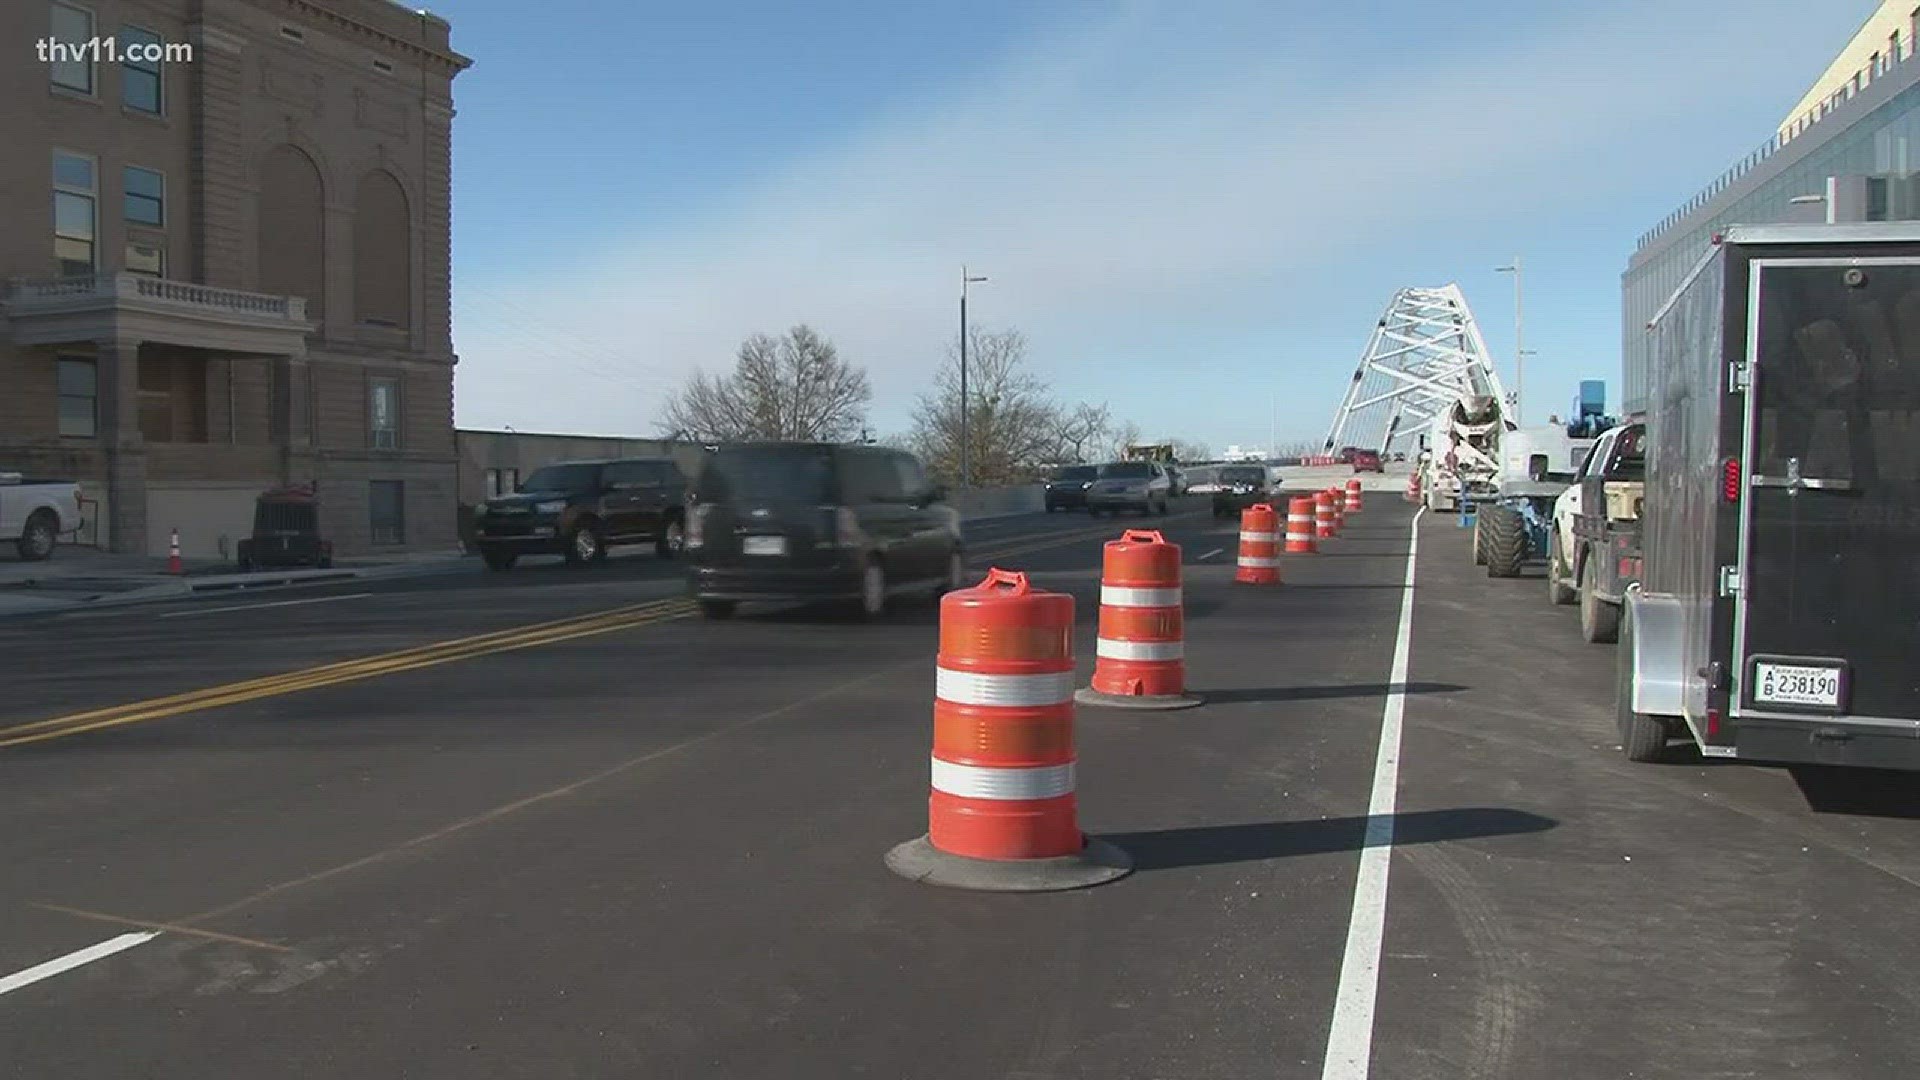 Broadway Bridge temporarily reduced to 2 lanes for construction